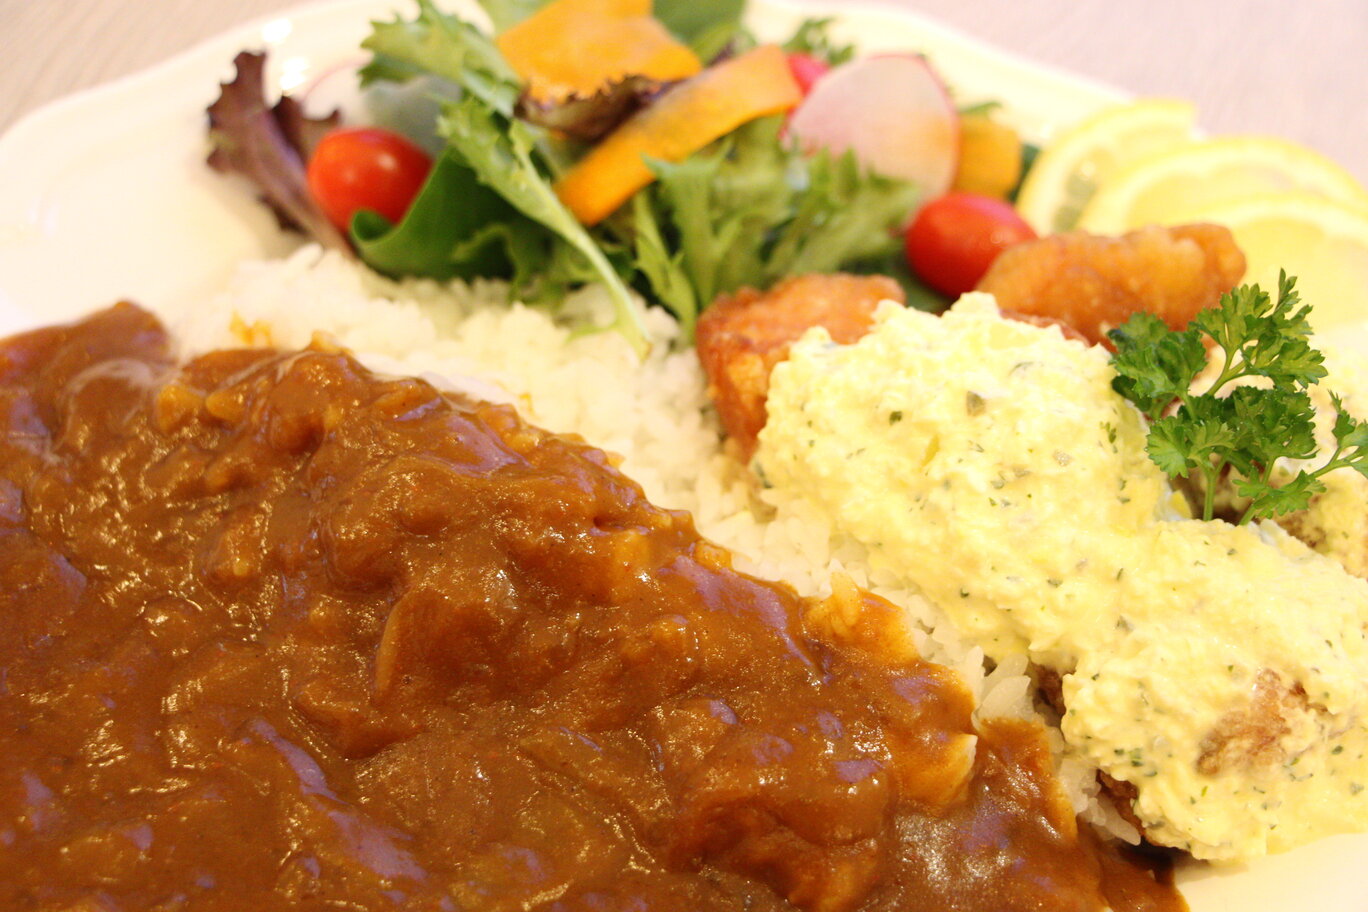 Japanese curry rice with chicken nanban